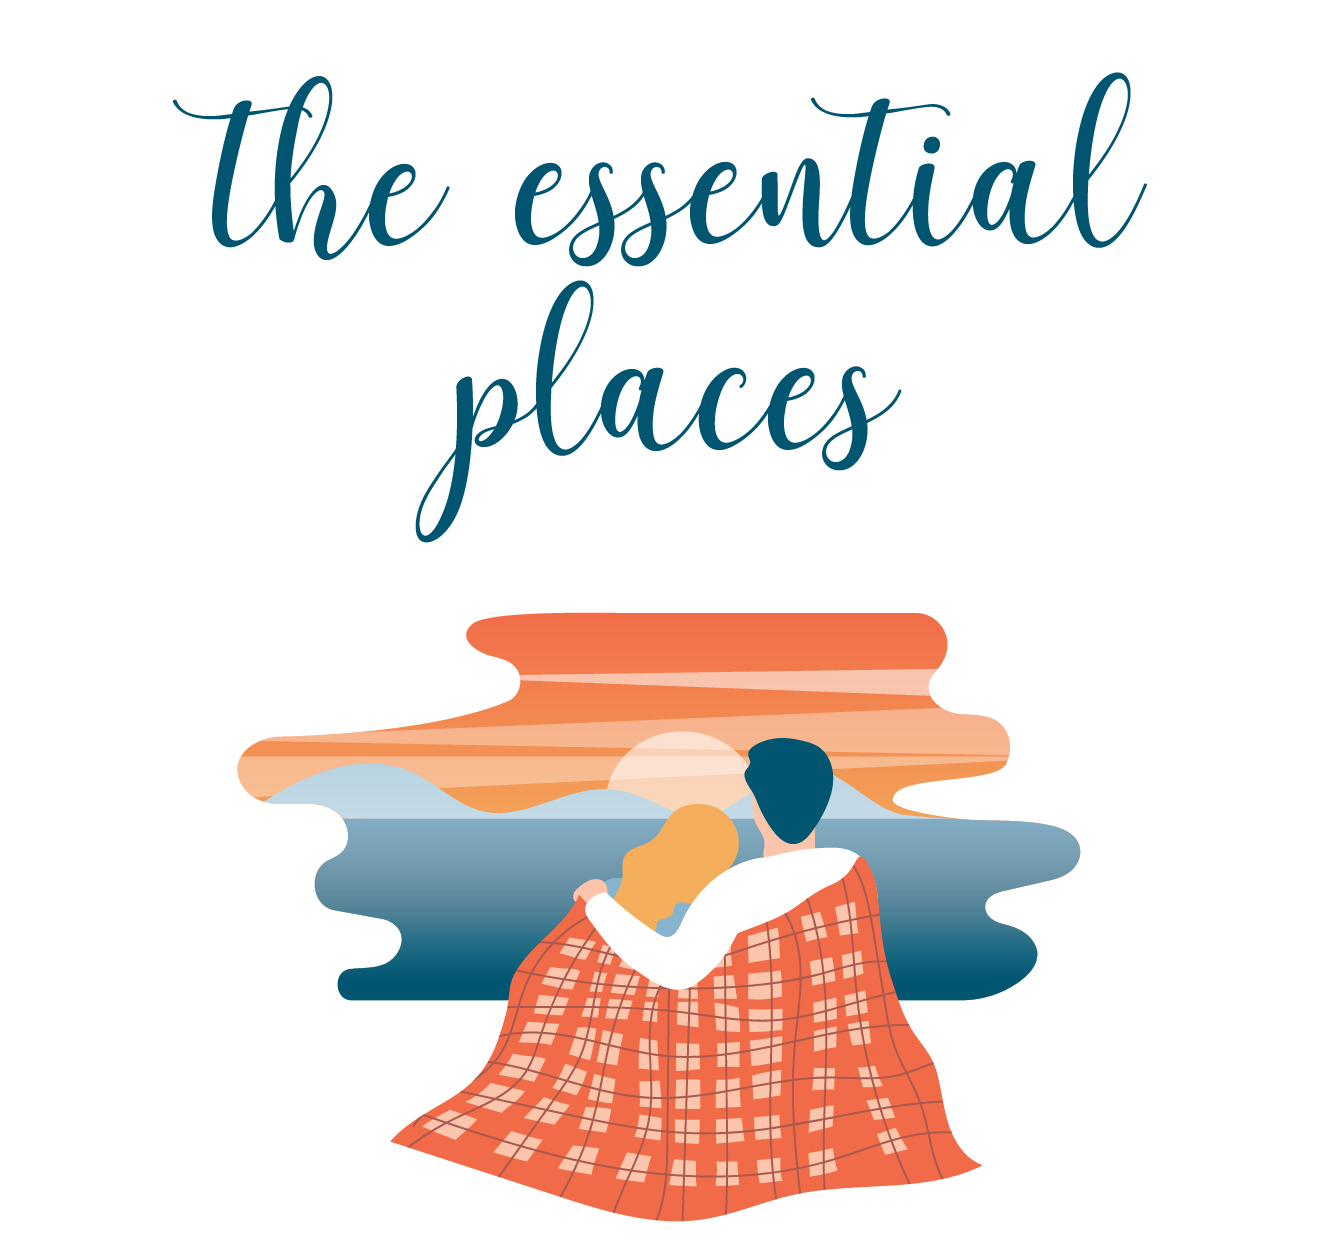 The essential places